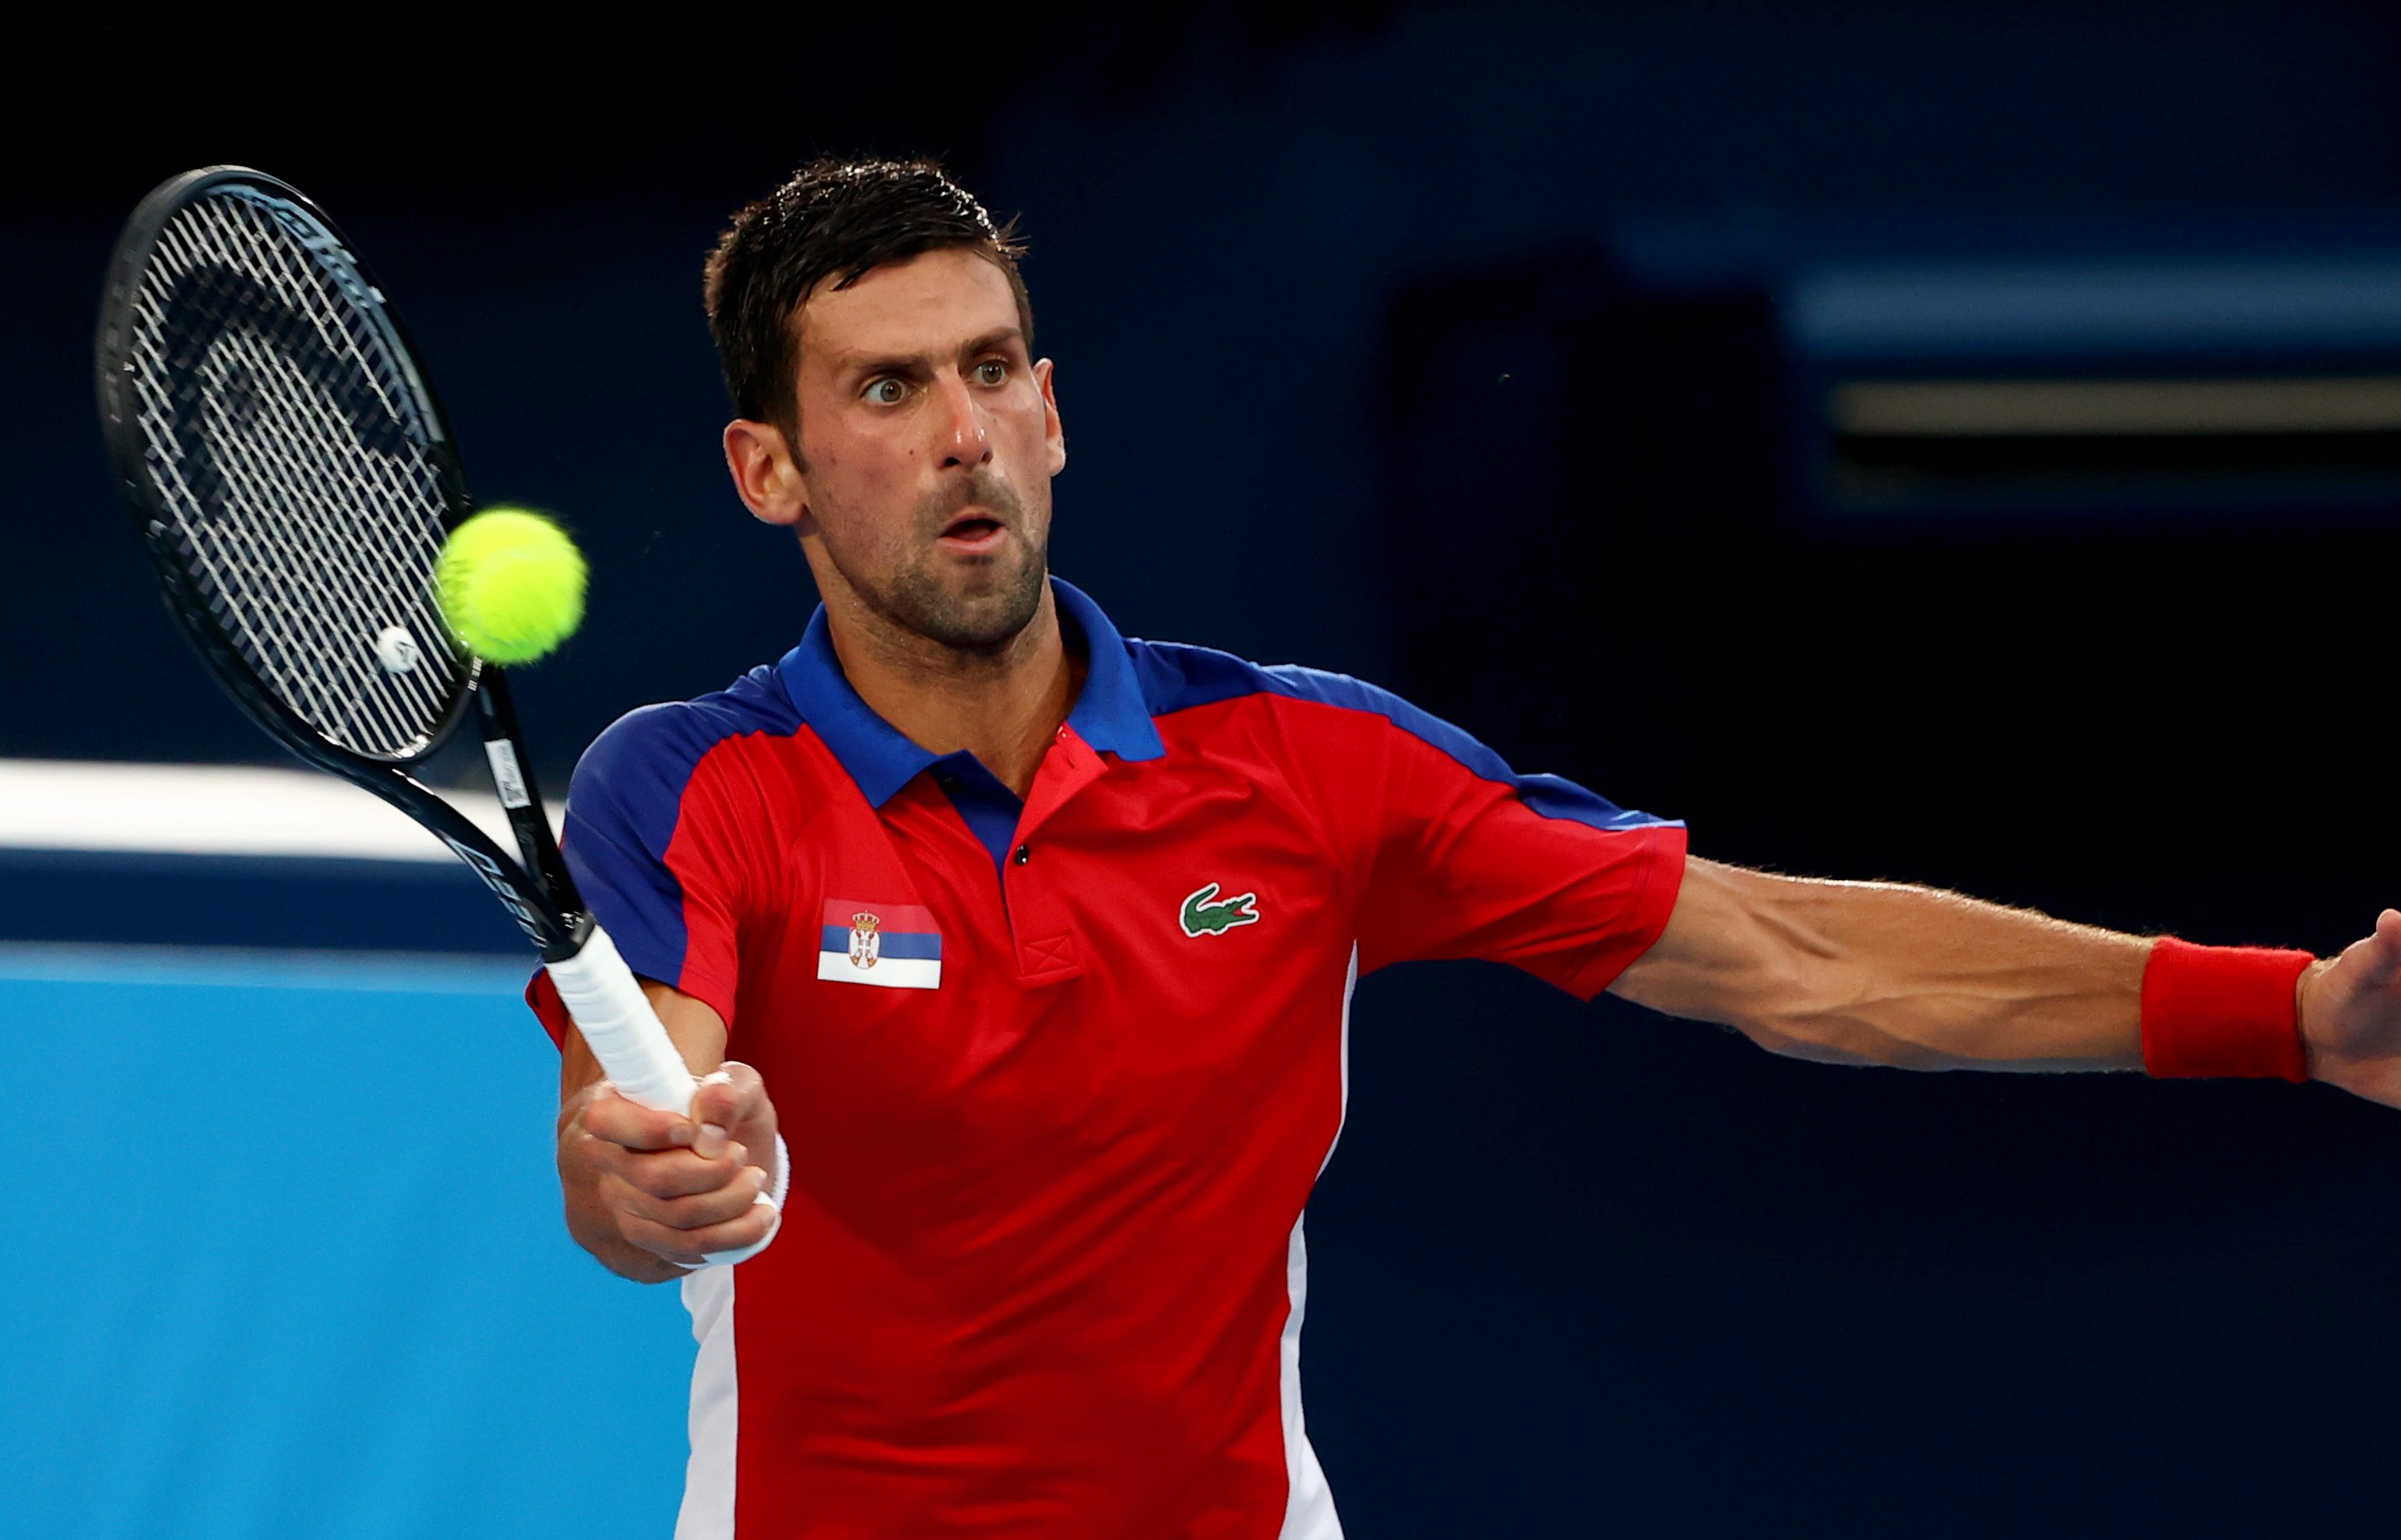 No special treatment in Djokovic exemption, Australian officials say